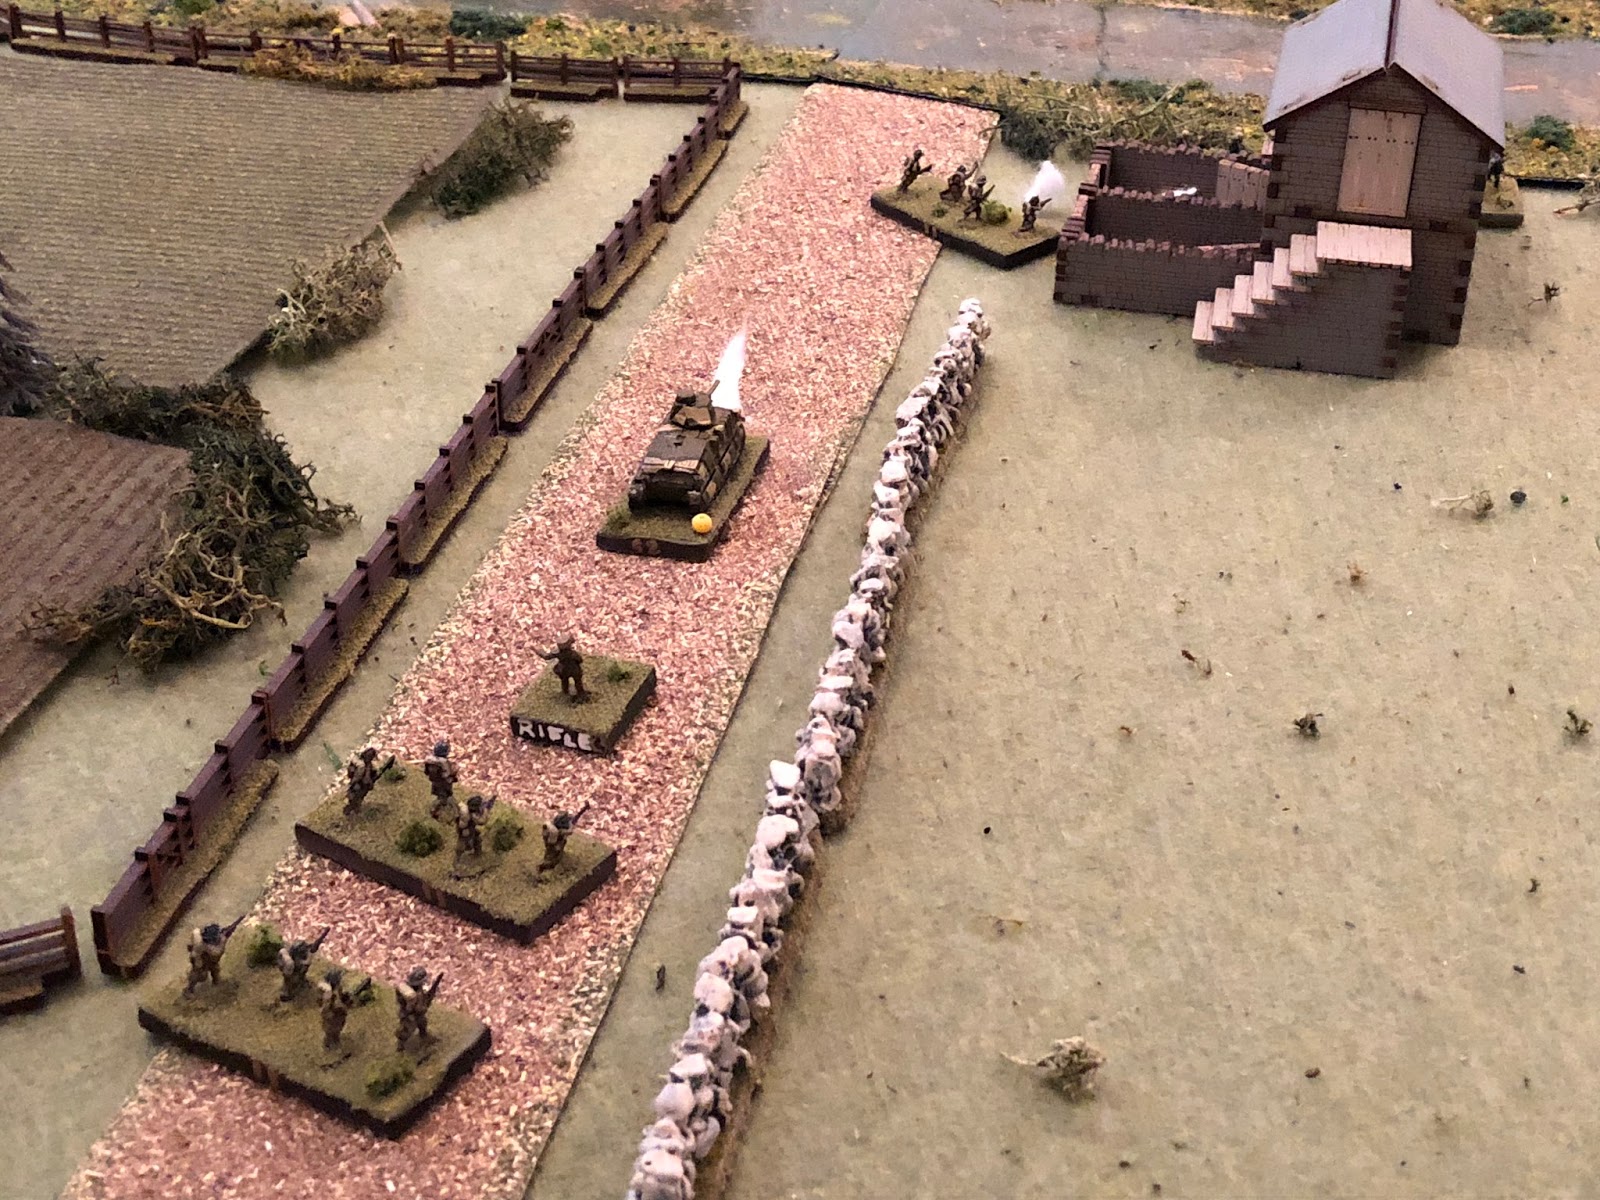  Back in the center on main street, the French Lieutenant for 2nd Platoon (center), orders his 1st Squad forward.&nbsp; The French infantrymen double-time up the street (top center), slowing once they reach the tollkeeper's house (which has the Germa